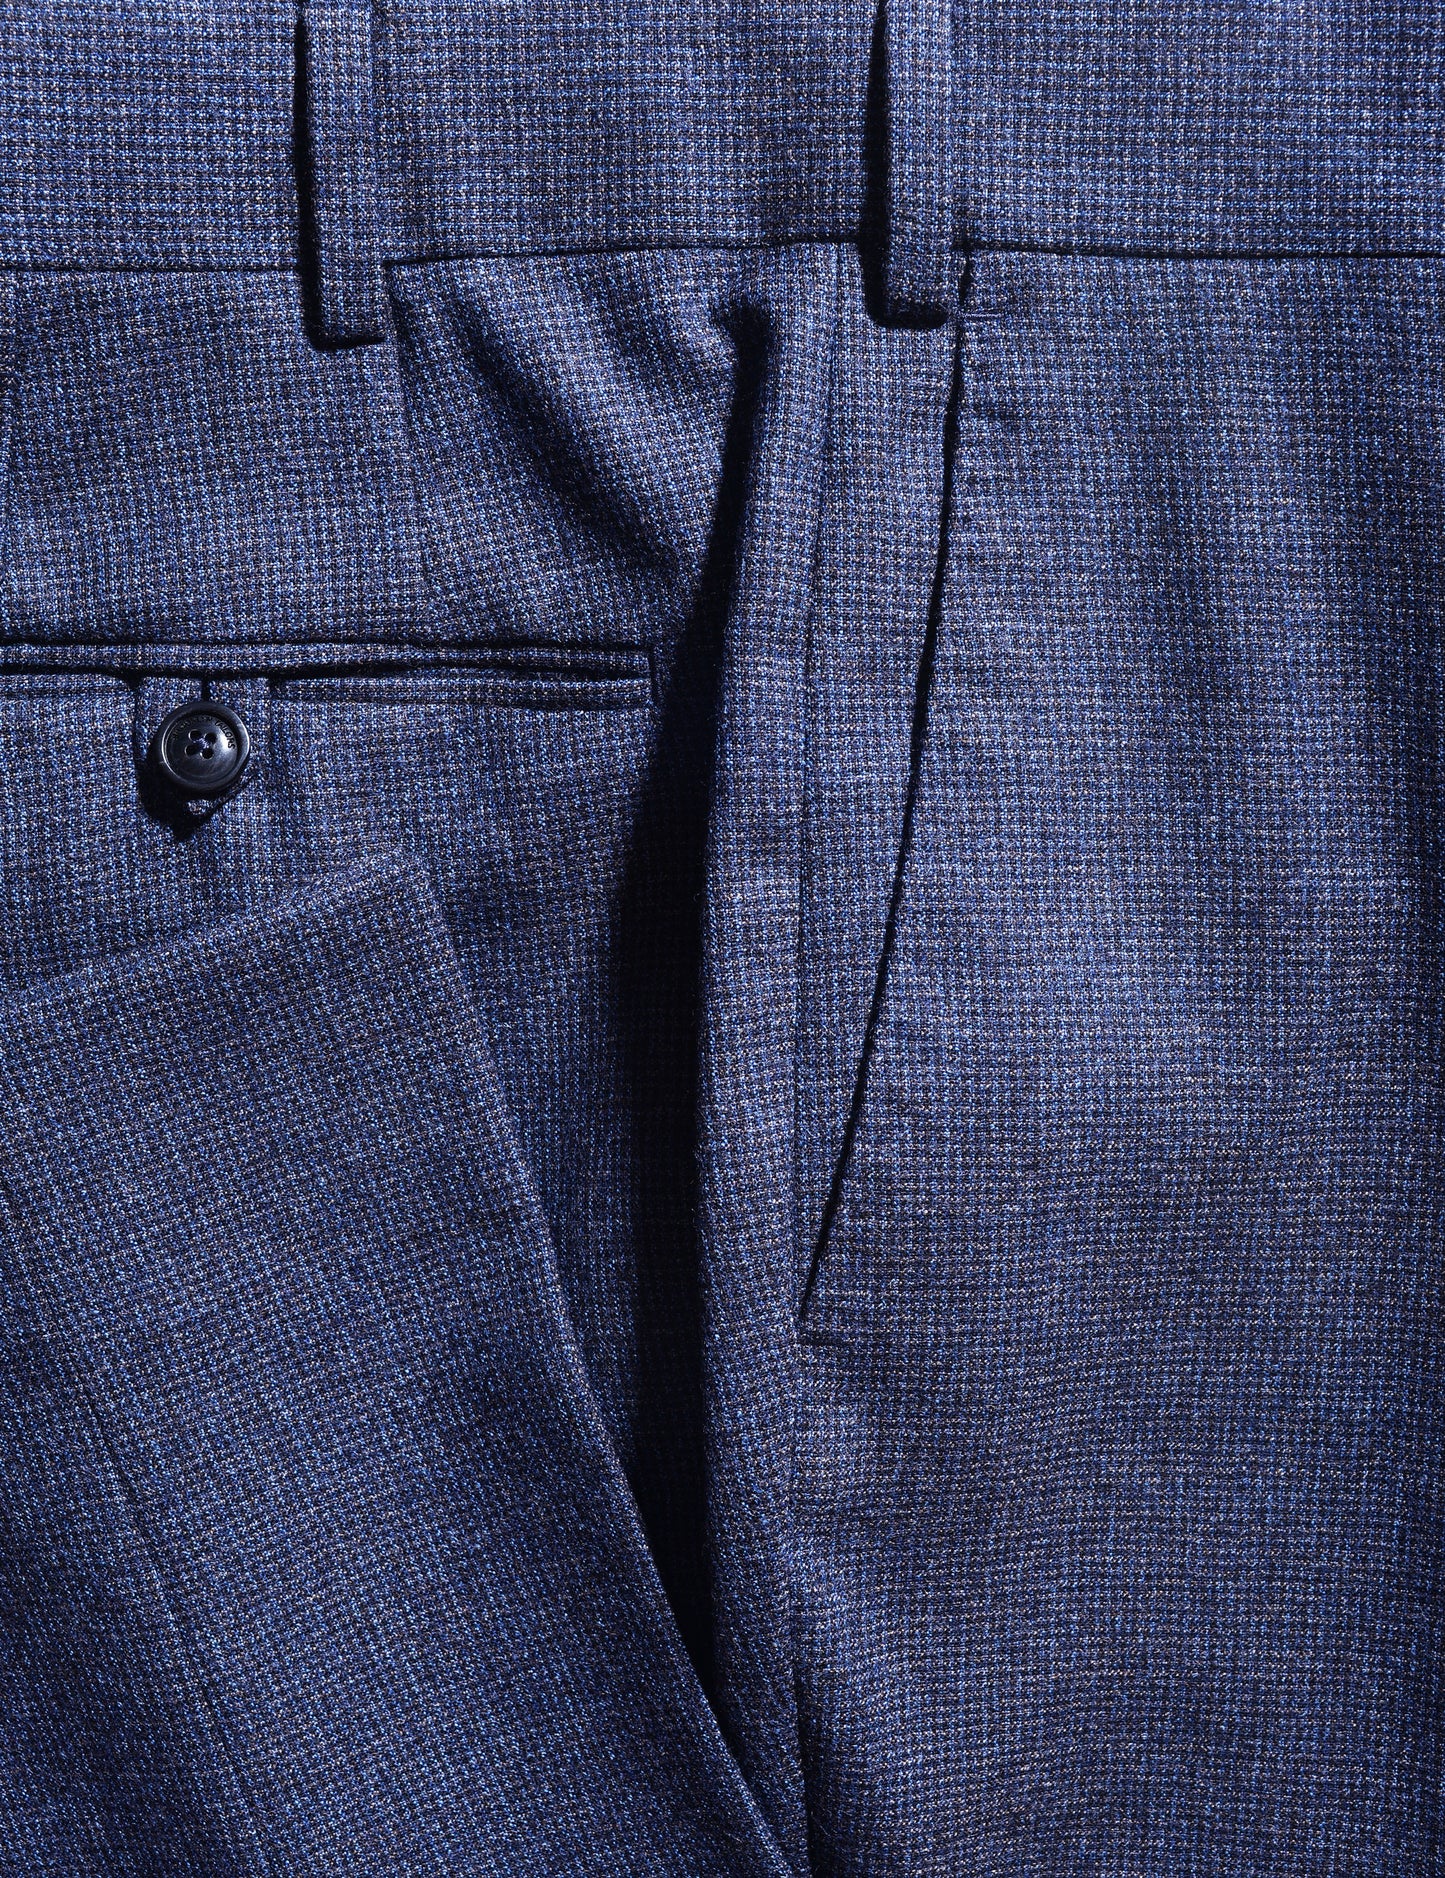 BKT50 Tailored Trousers in Super 130s Houndstooth Flannel - Blue Night